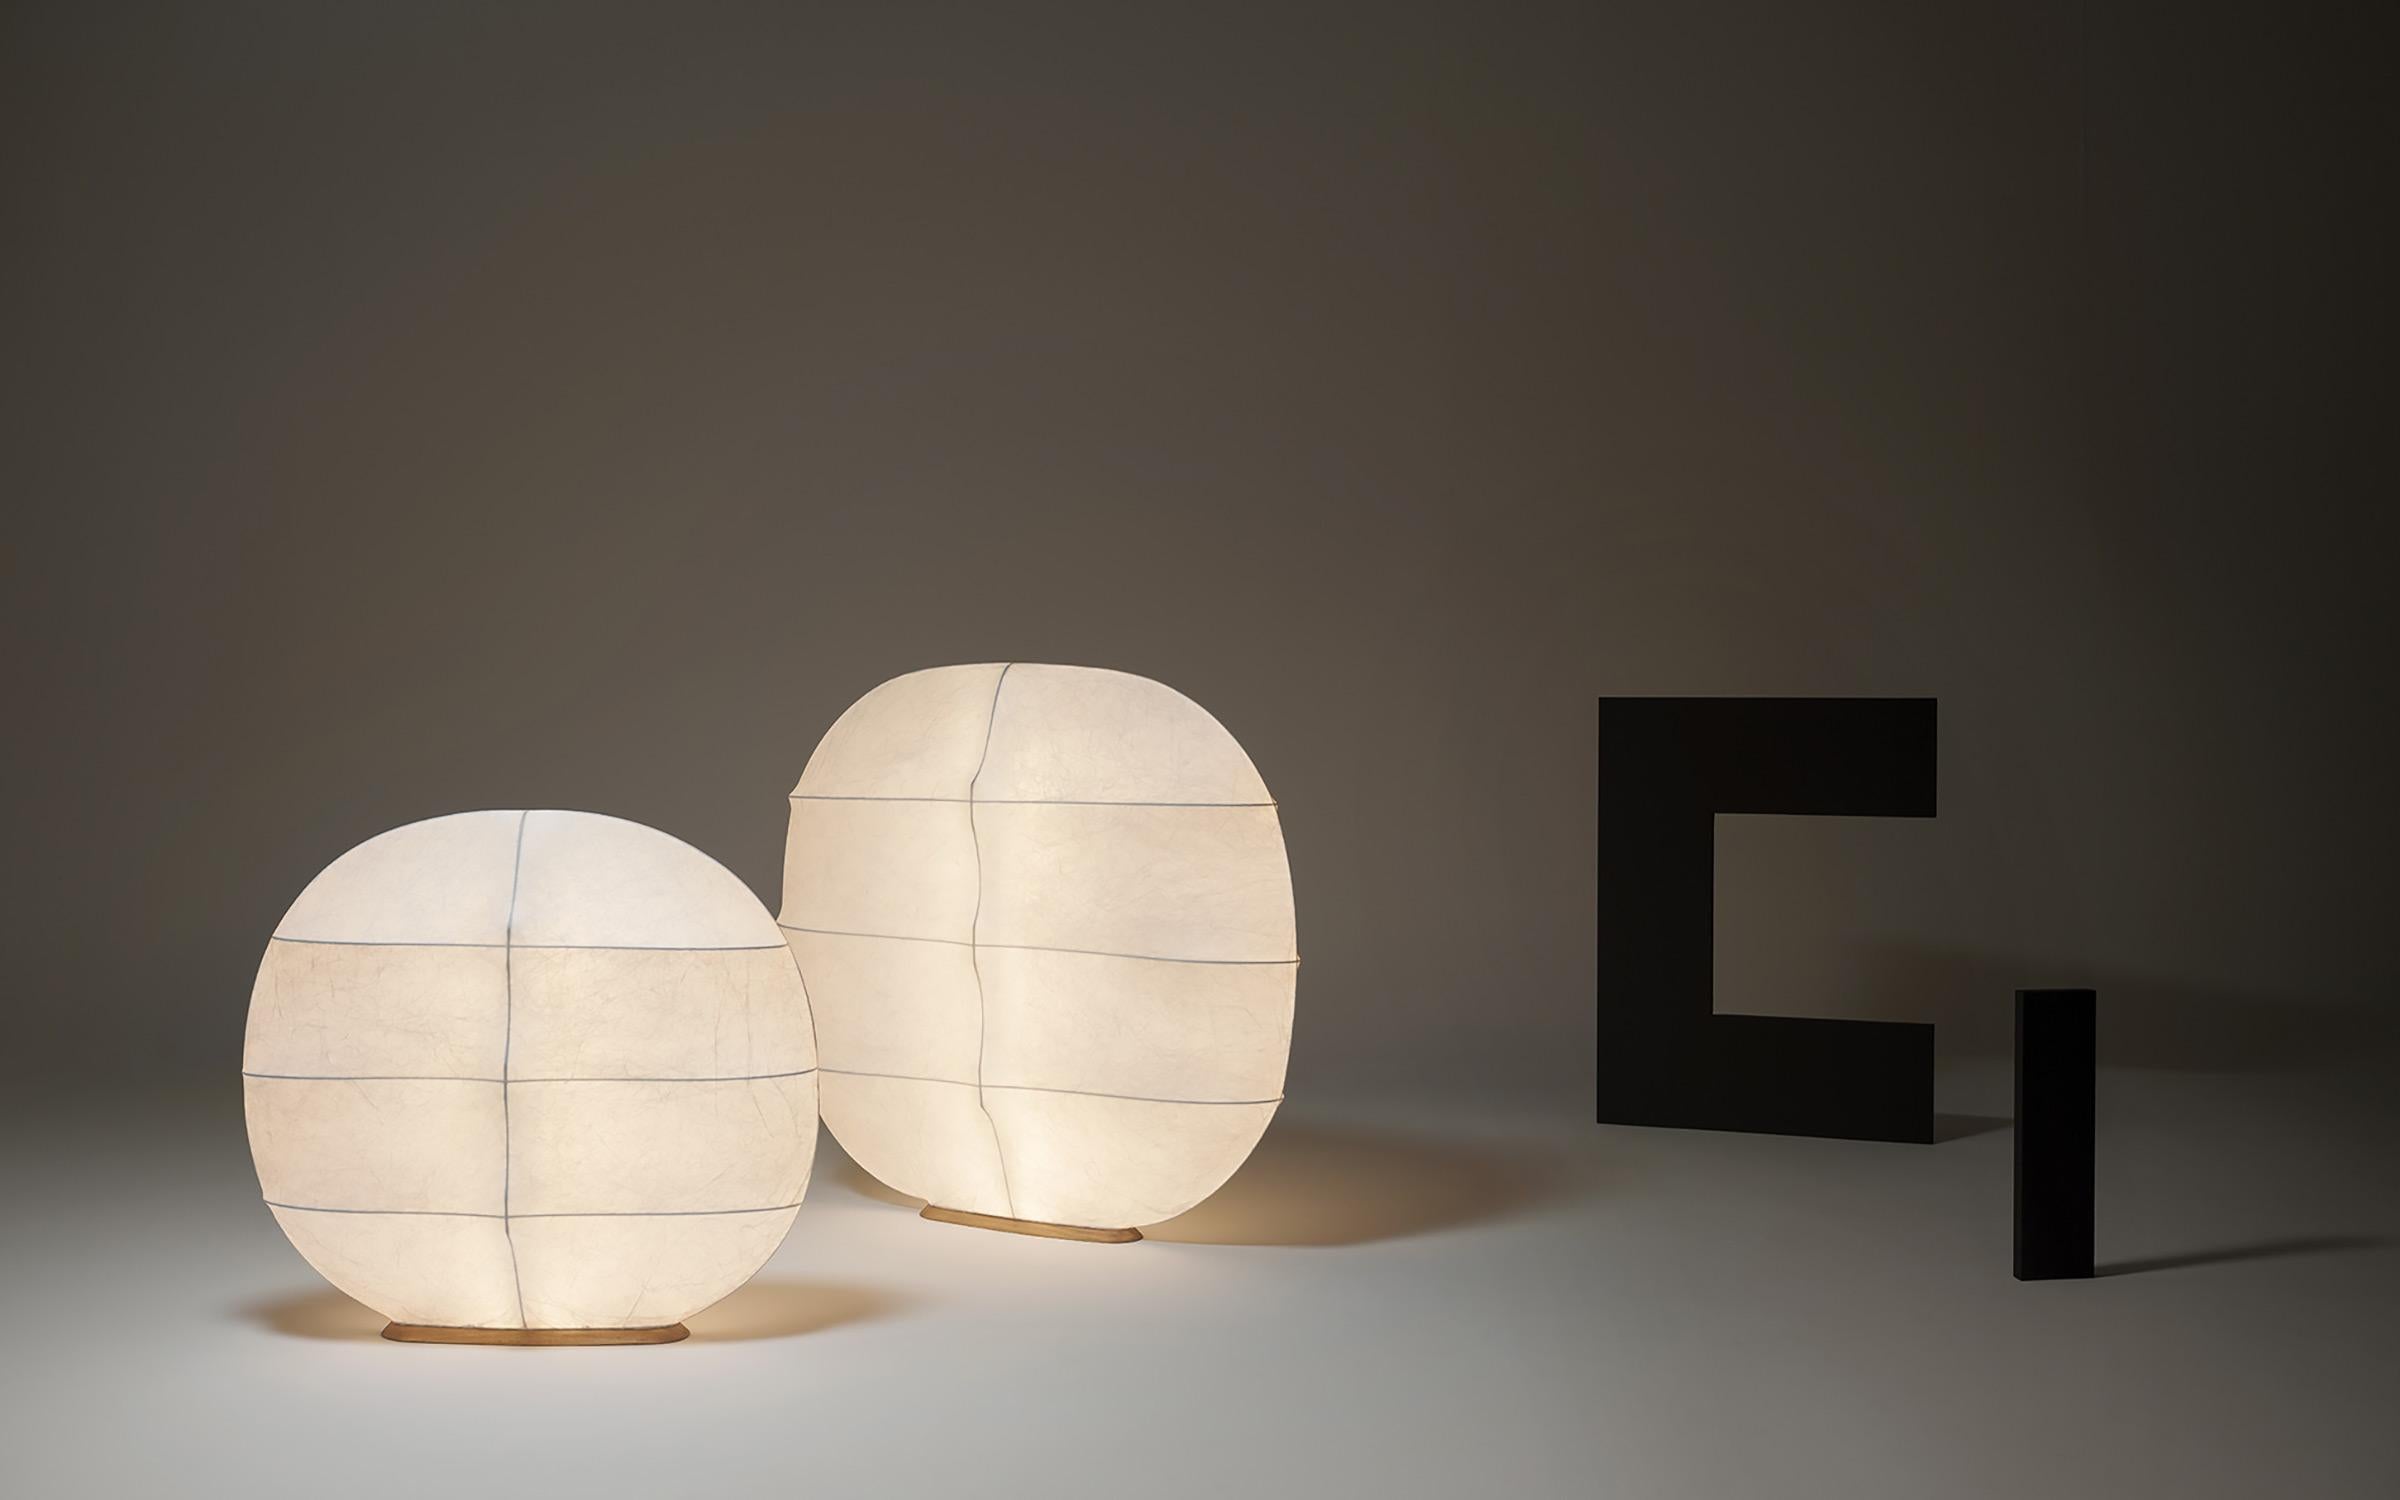 An ethereal and floating sculpture that transforms matter into a design tool. A warm and suffused glow that divides the space, but at the same time unites it. Available in two sizes, Studiopepe’s luminous screen is made of cocoon resin fiber – a